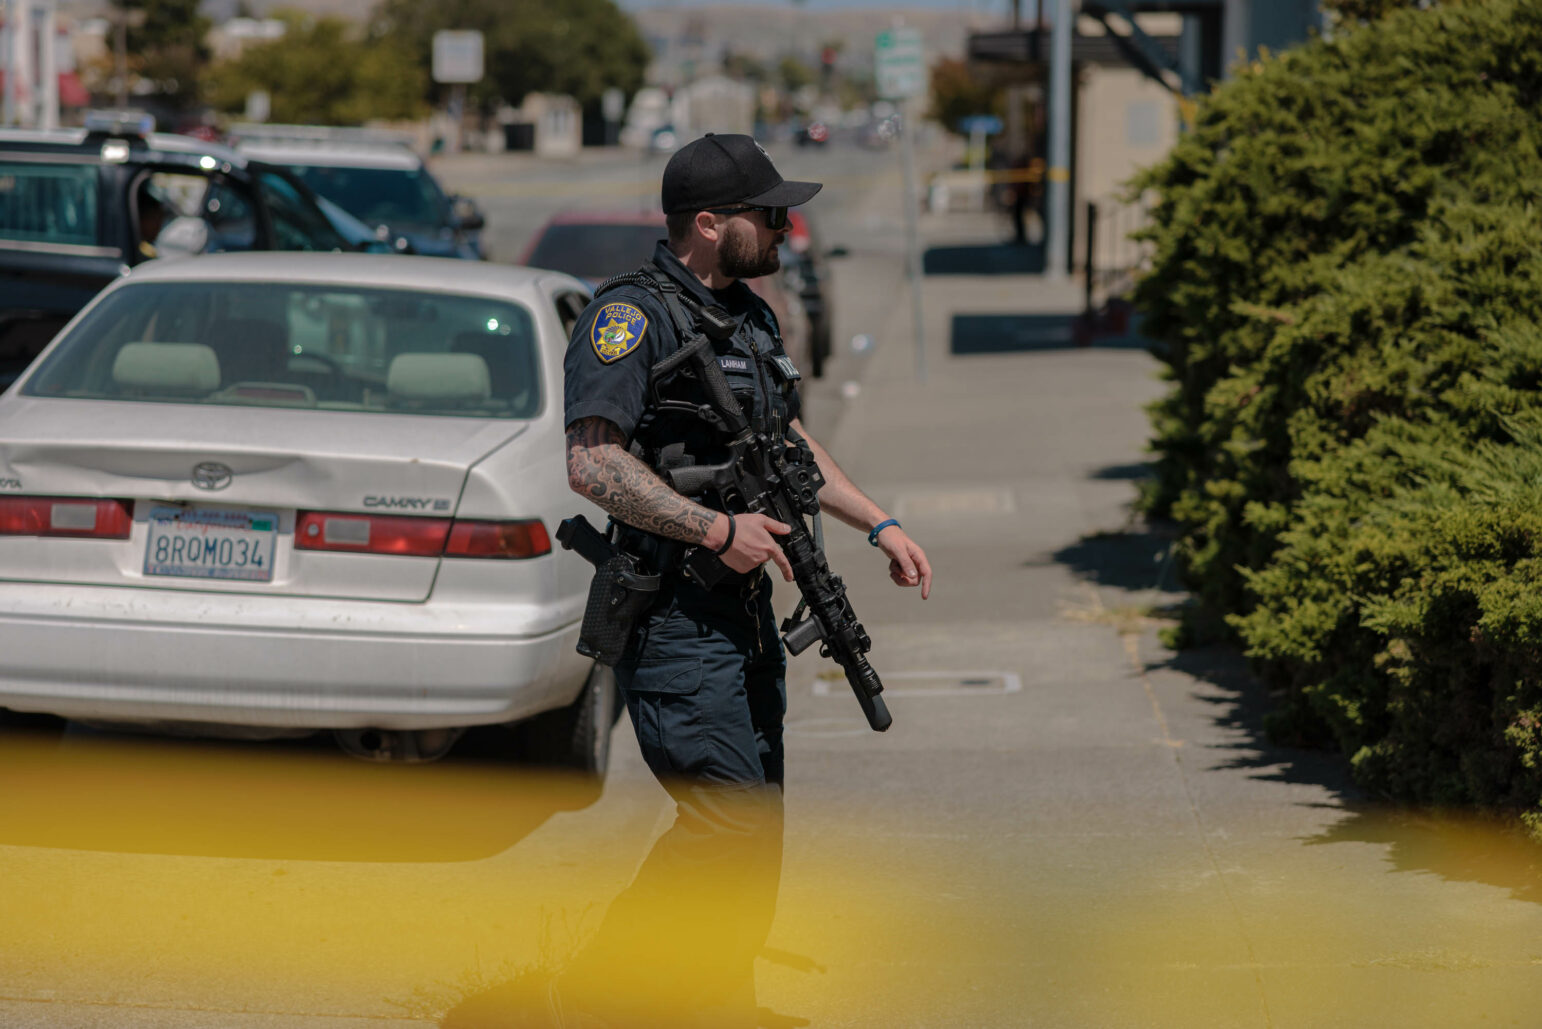 A police officer holding a rifle approaches a residence during daytime.